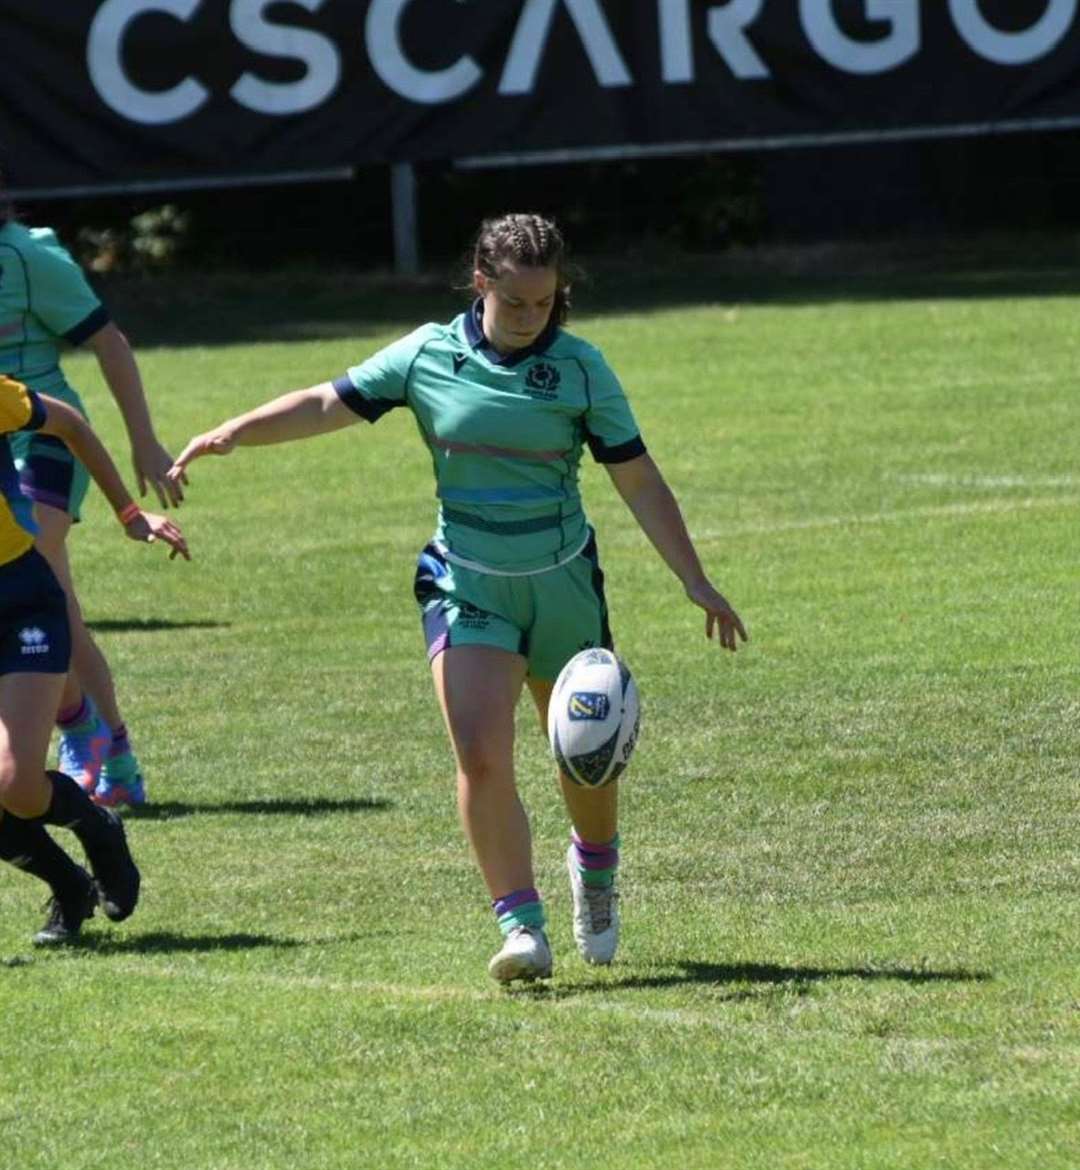 Rianna Darroch kicking for goals in the match against France's U18s in Prague.